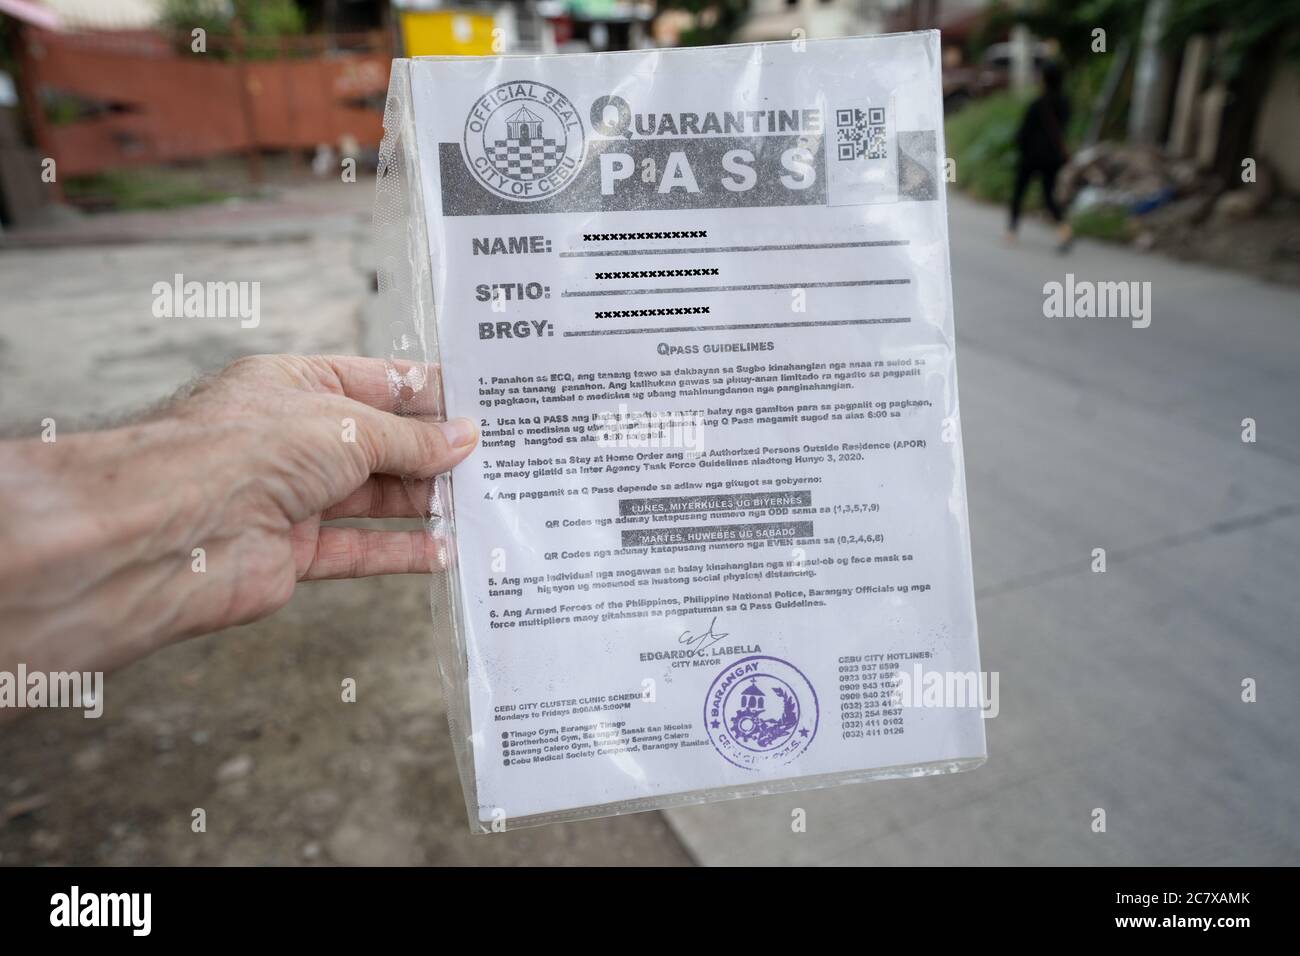 An Enhanced Community Quarantine Pass issued by the local Government to residents within Cebu City during COVID-19 outbreak 2020. Stock Photo